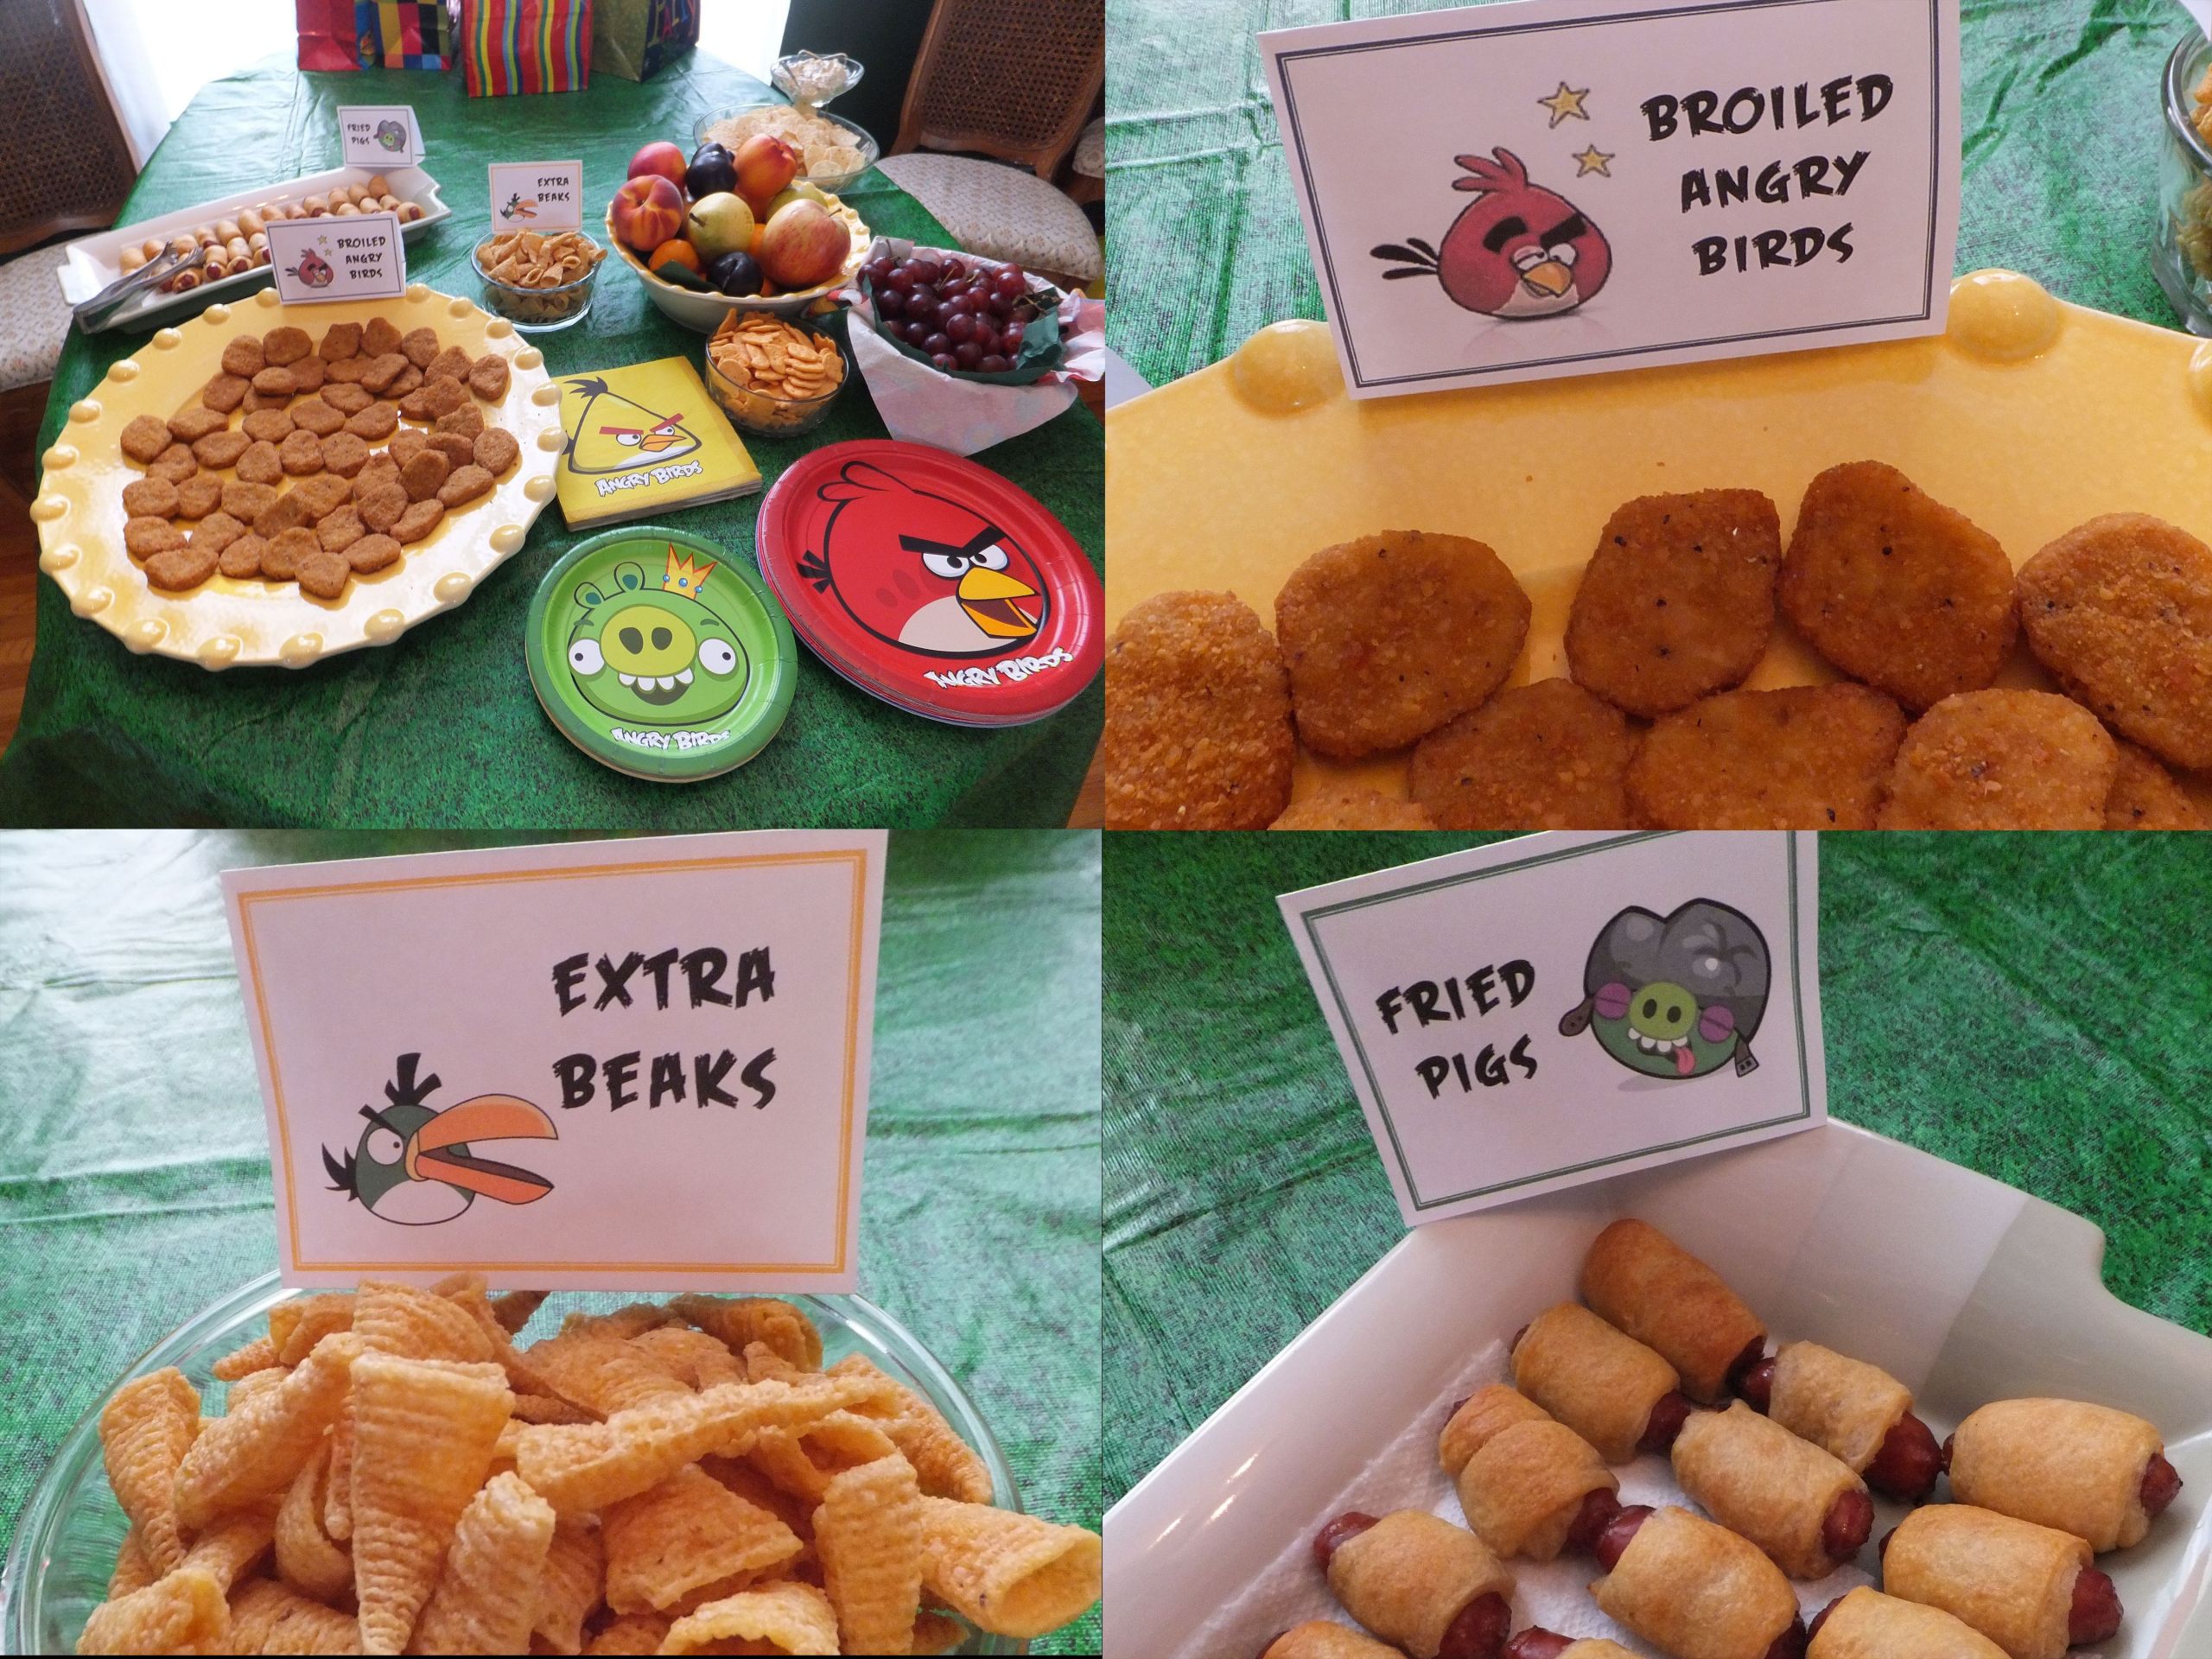 Angry Birds Party Food Ideas
 Angry Birds Birthday Party some food ideas chicken